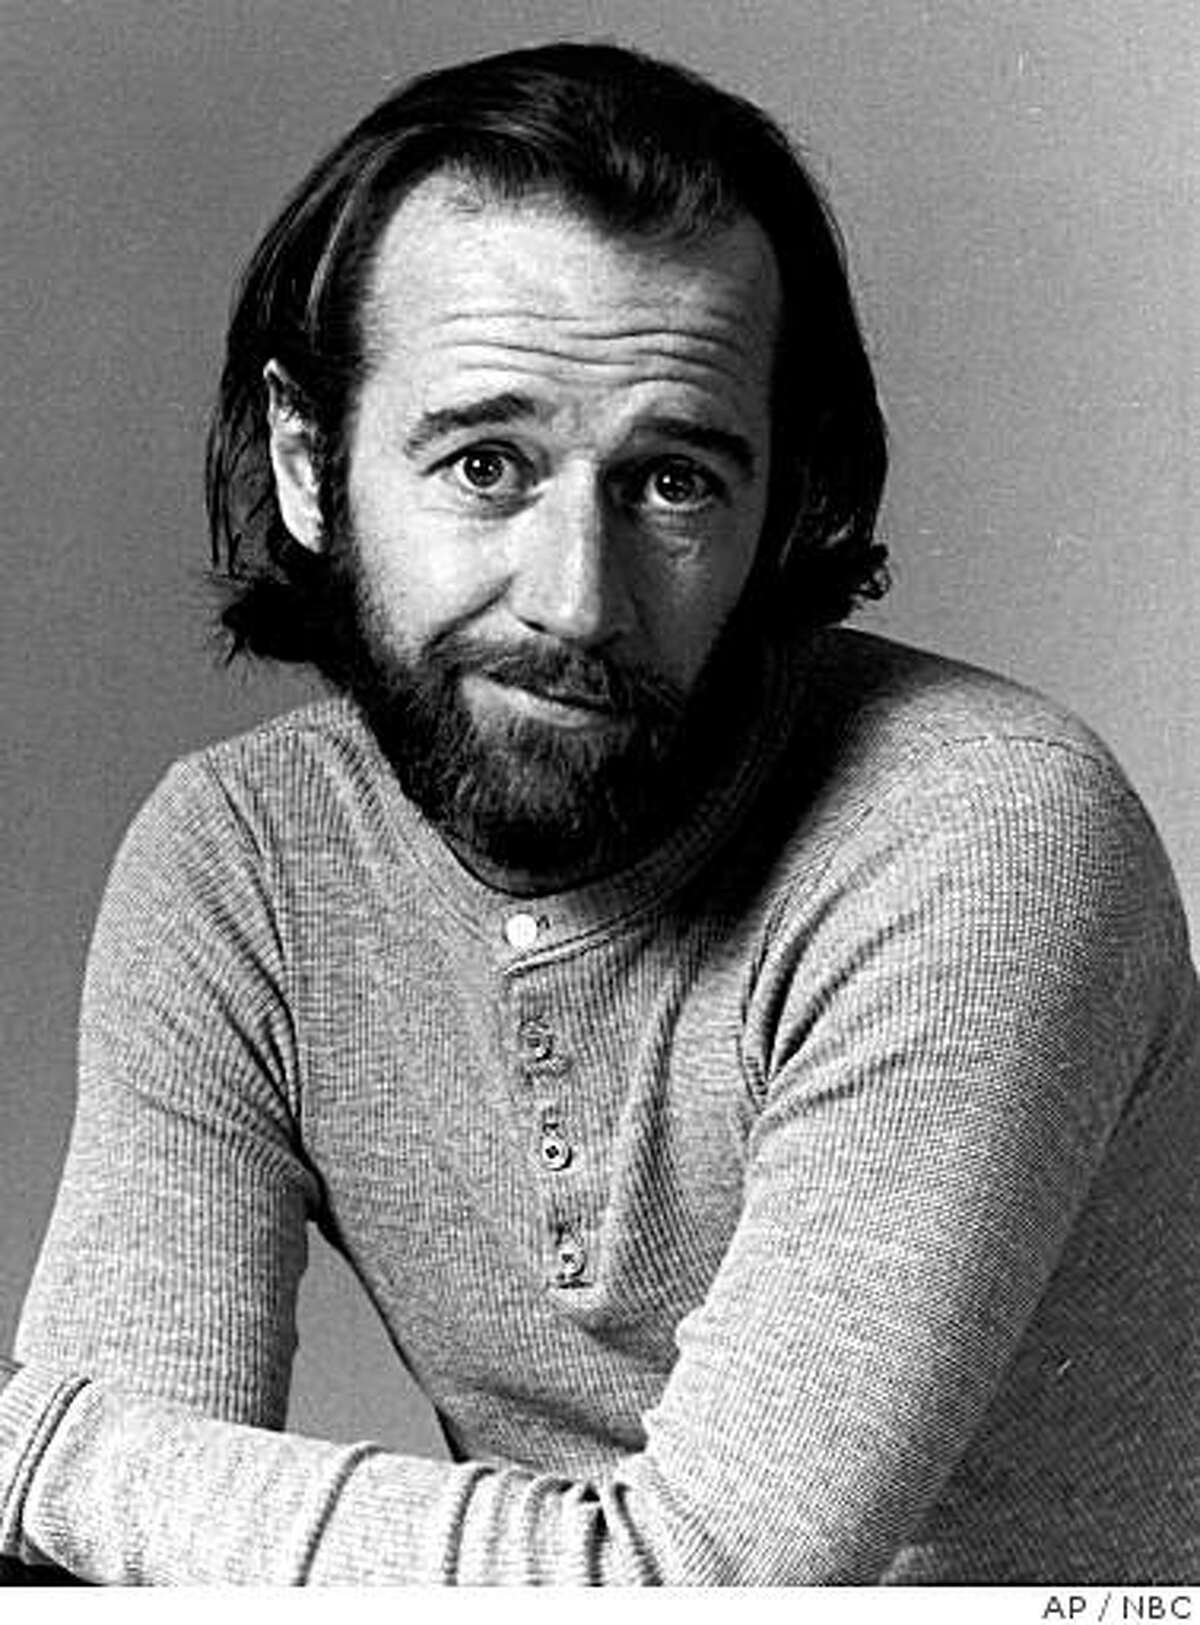 George Carlin provocateur for the ages